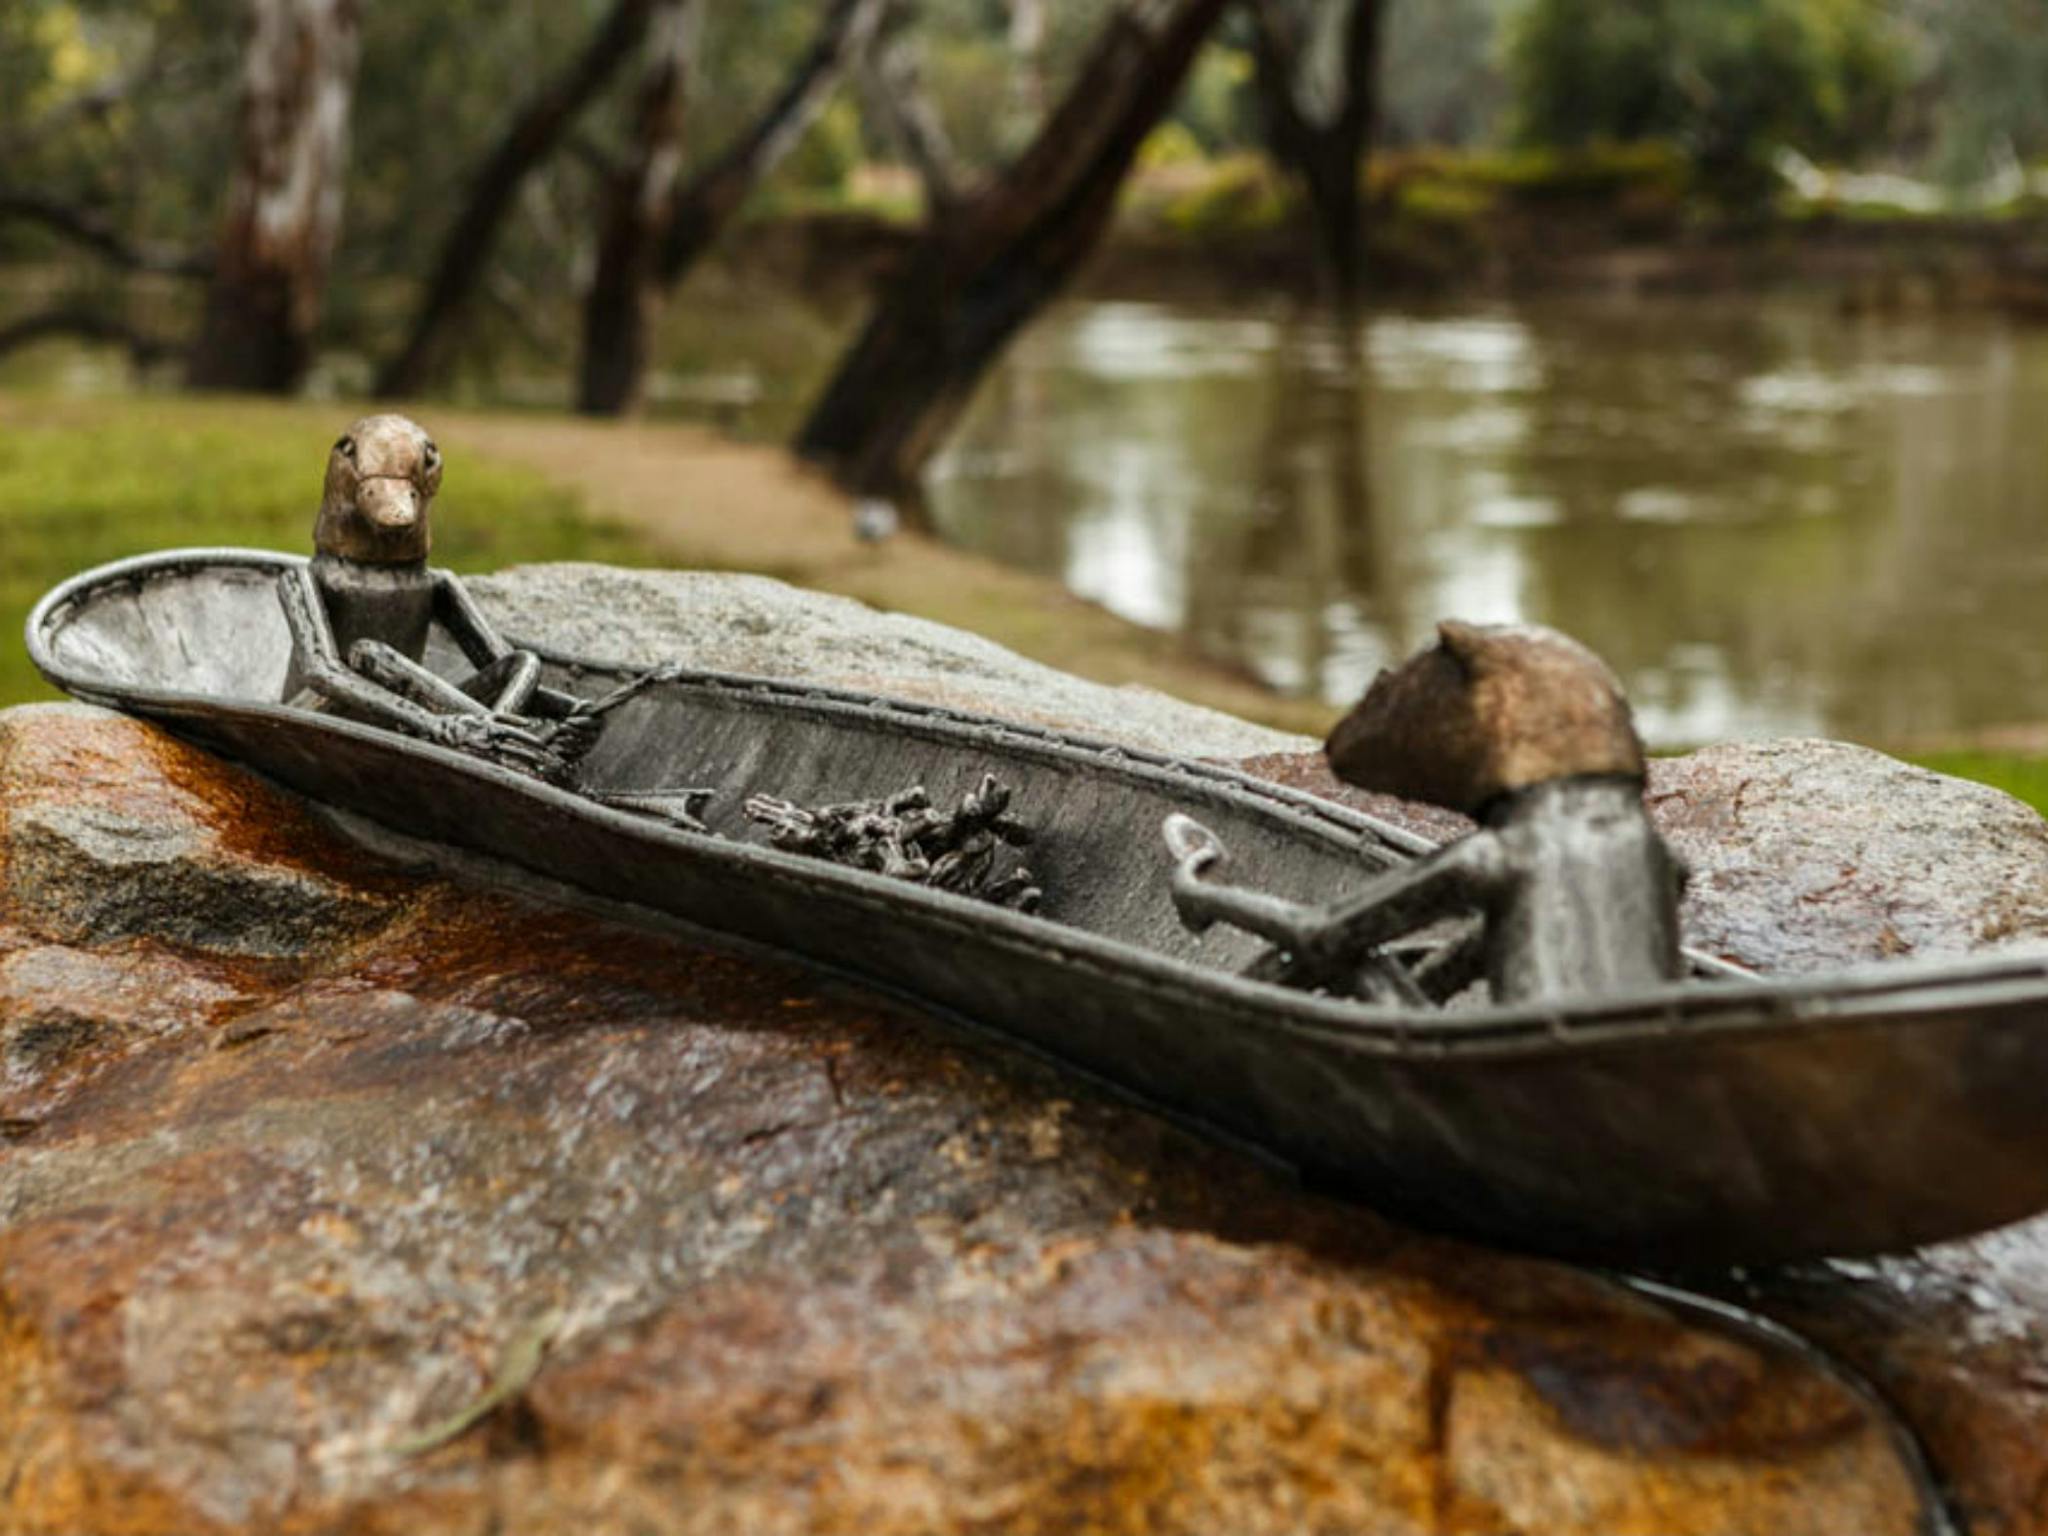 Canoe Sculpture showing the story of Mullinmurr - Playpus, ovens river, trees, river bank